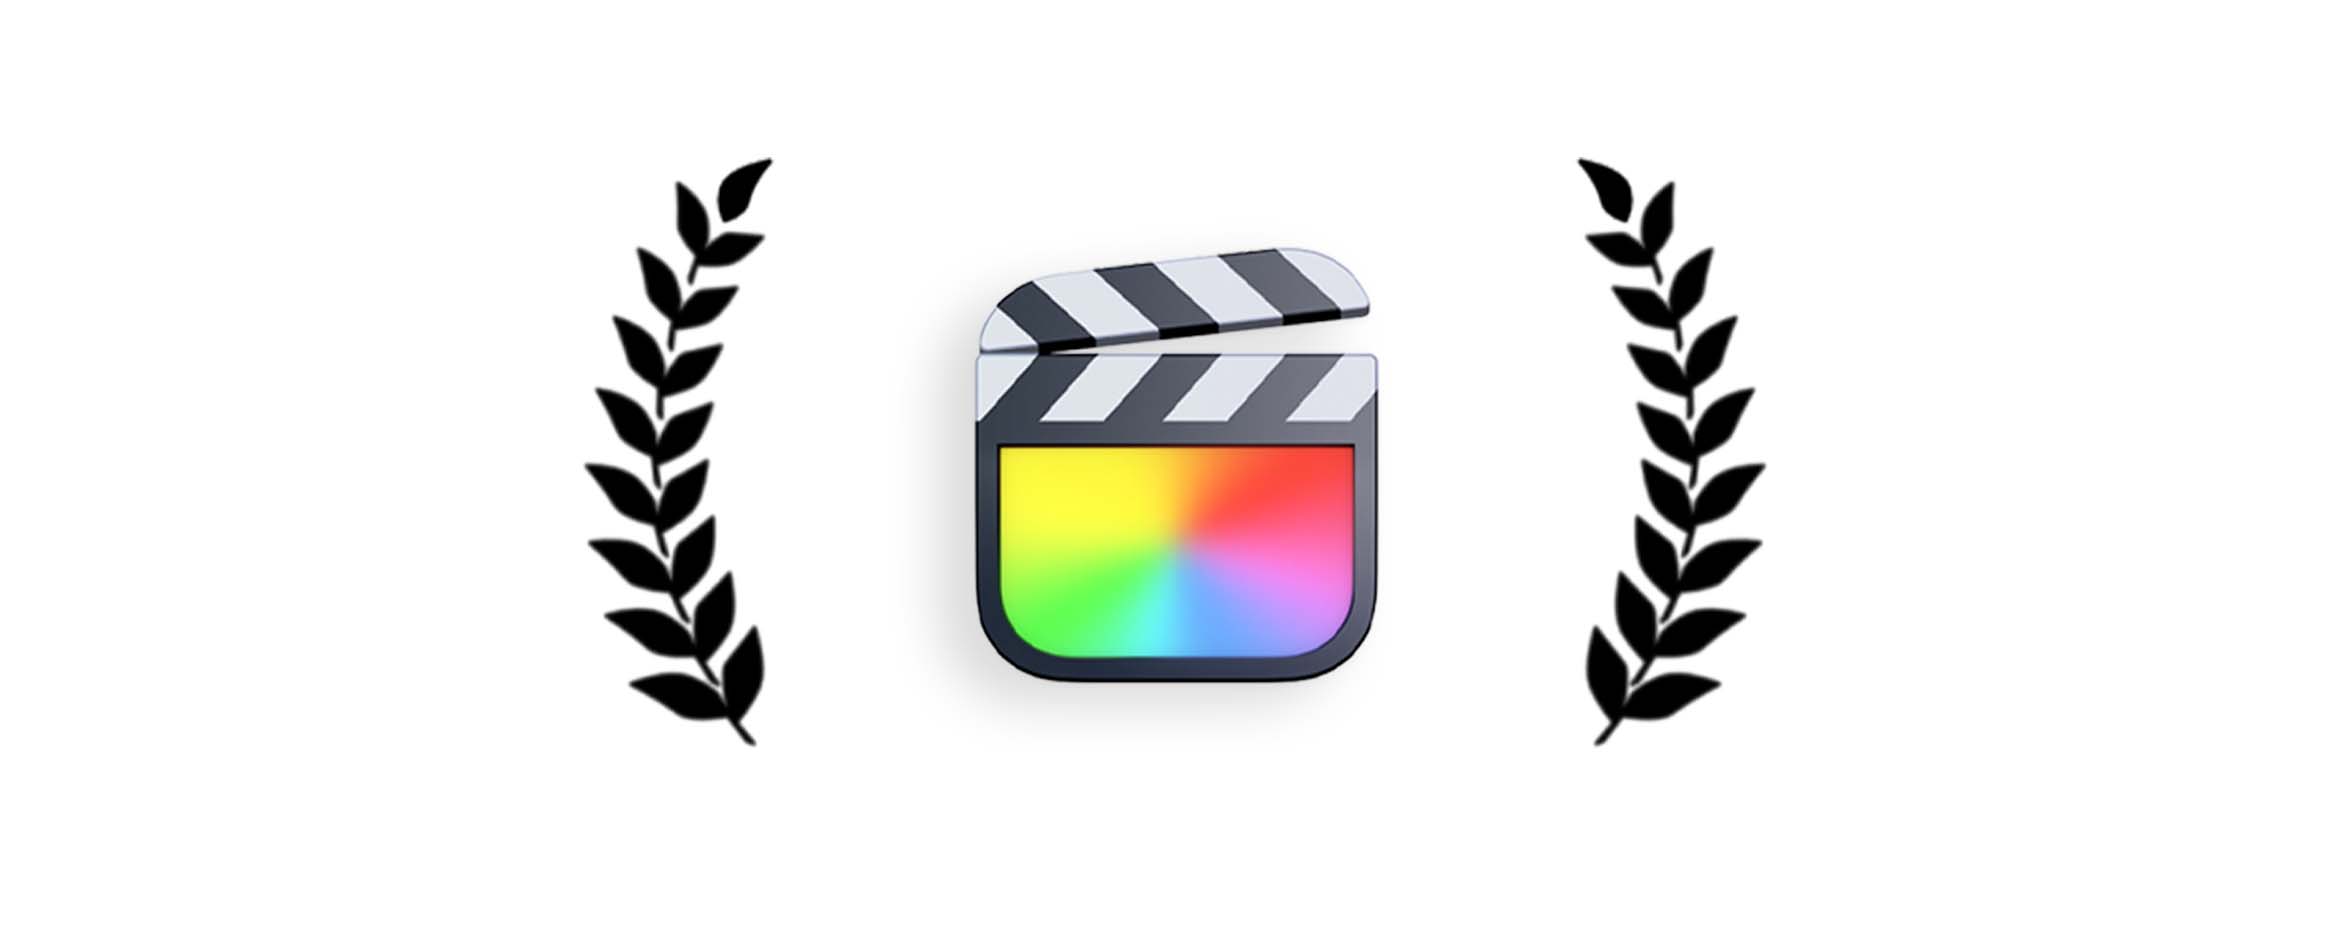 What’s so special about Final Cut Pro anyway?